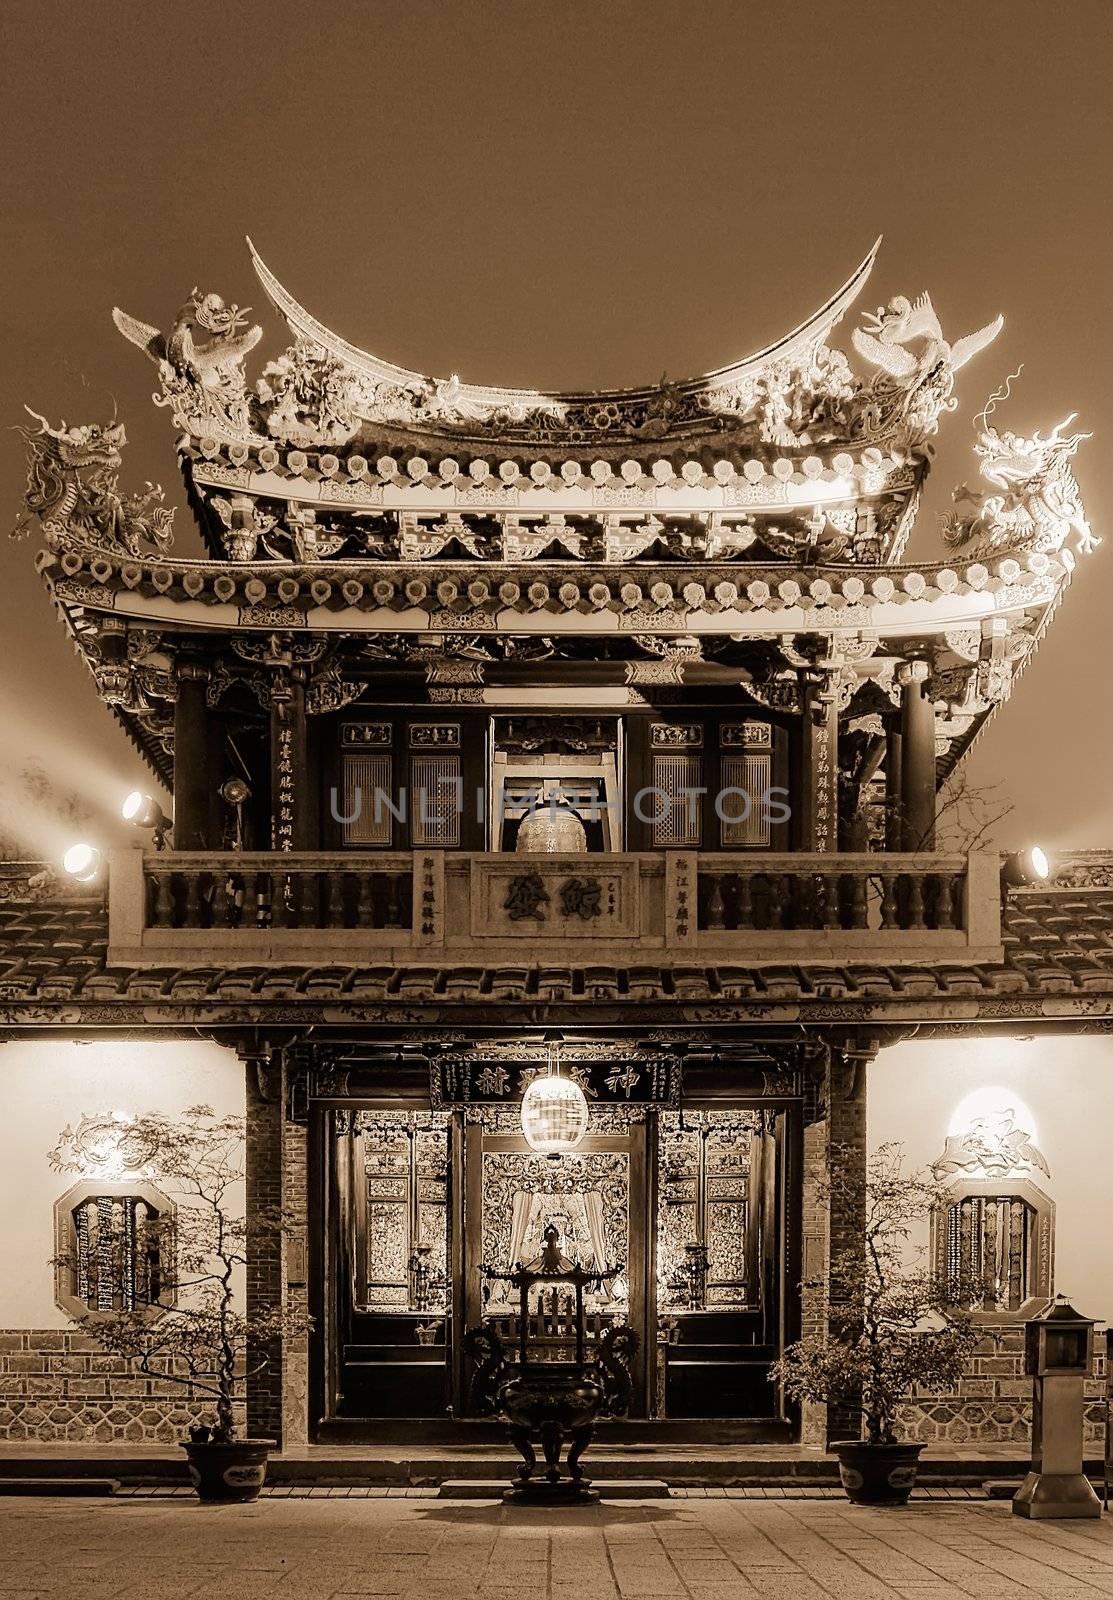 Night scenery of chinese traditional old temple. by elwynn